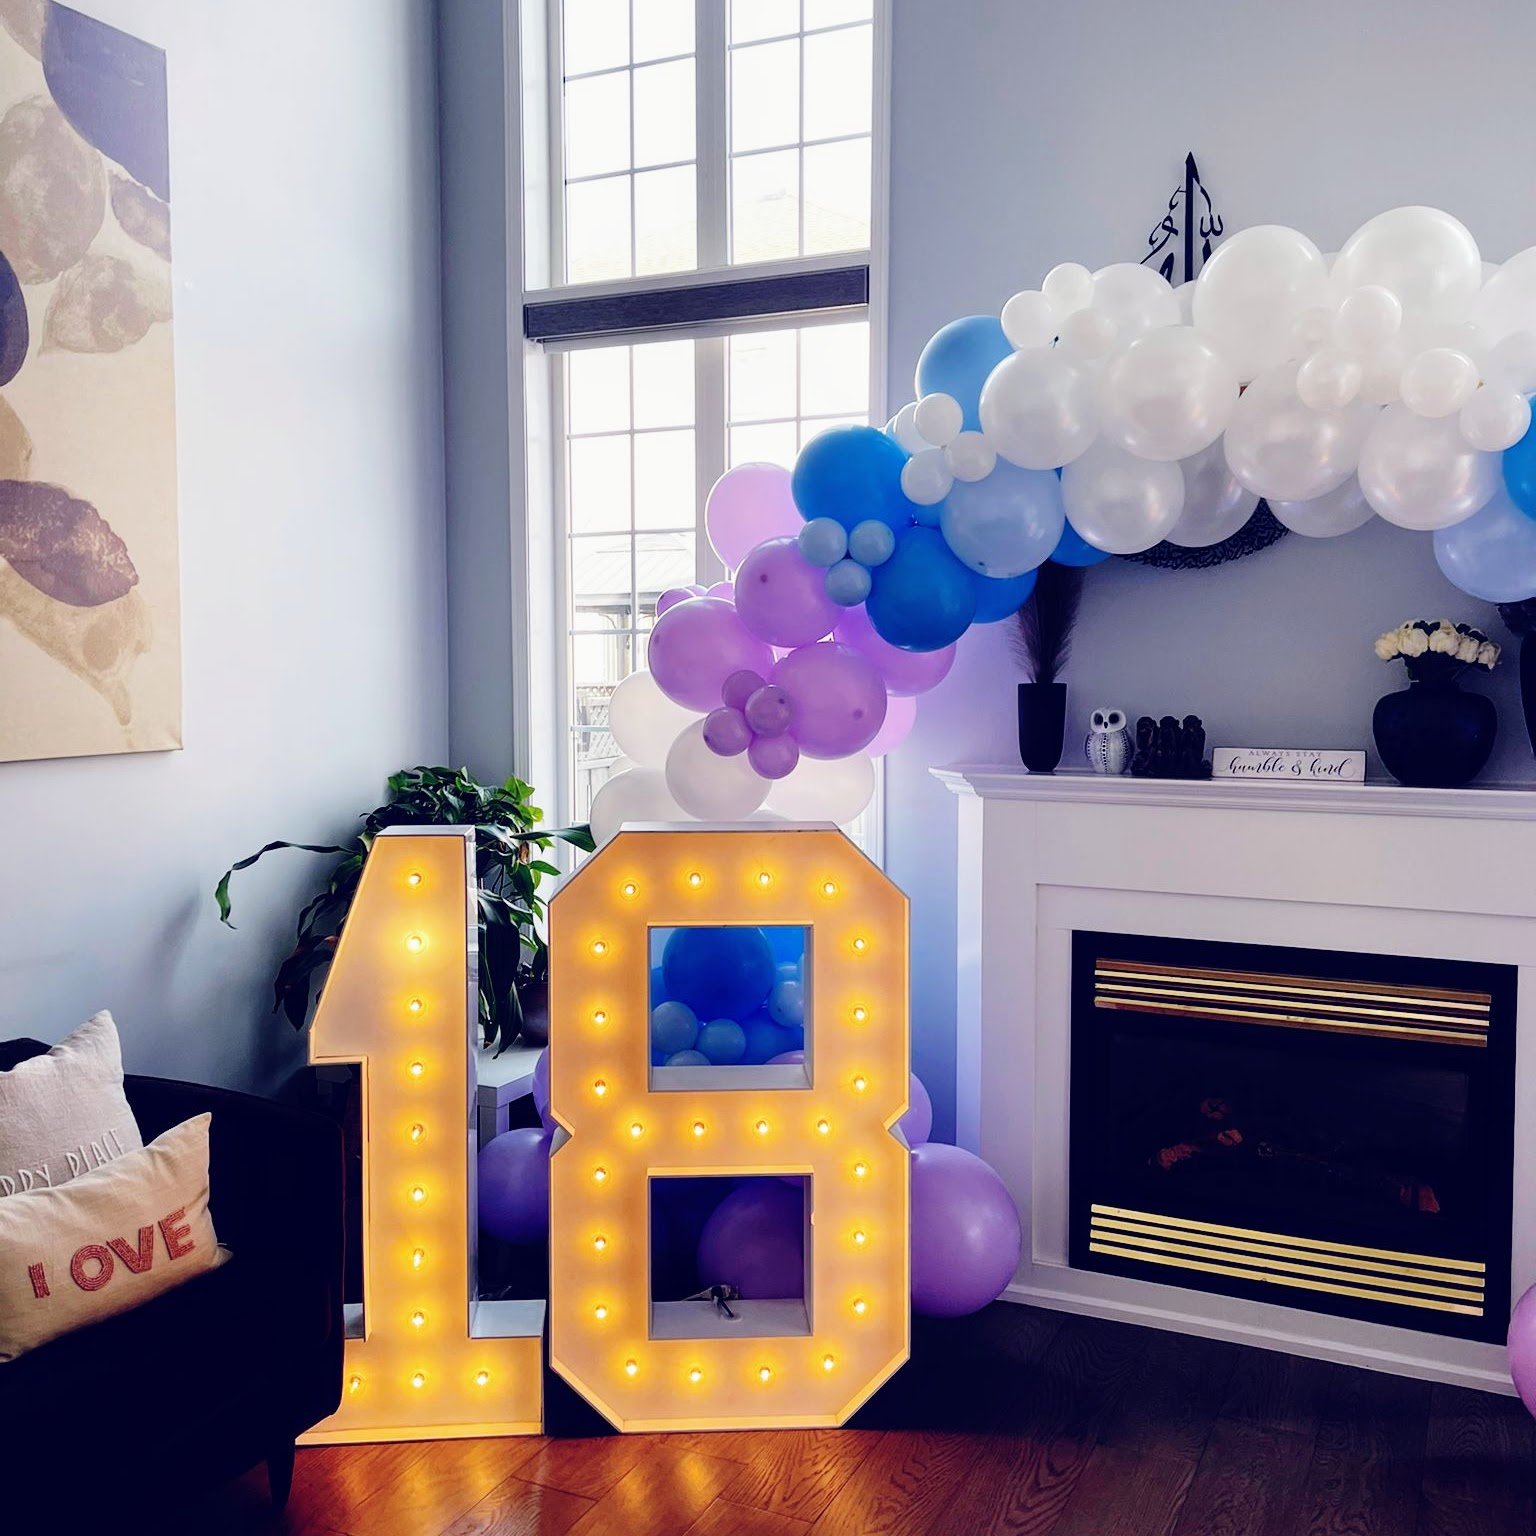 Balloon arches, the best decorations with balloon arrangements in Mississauga